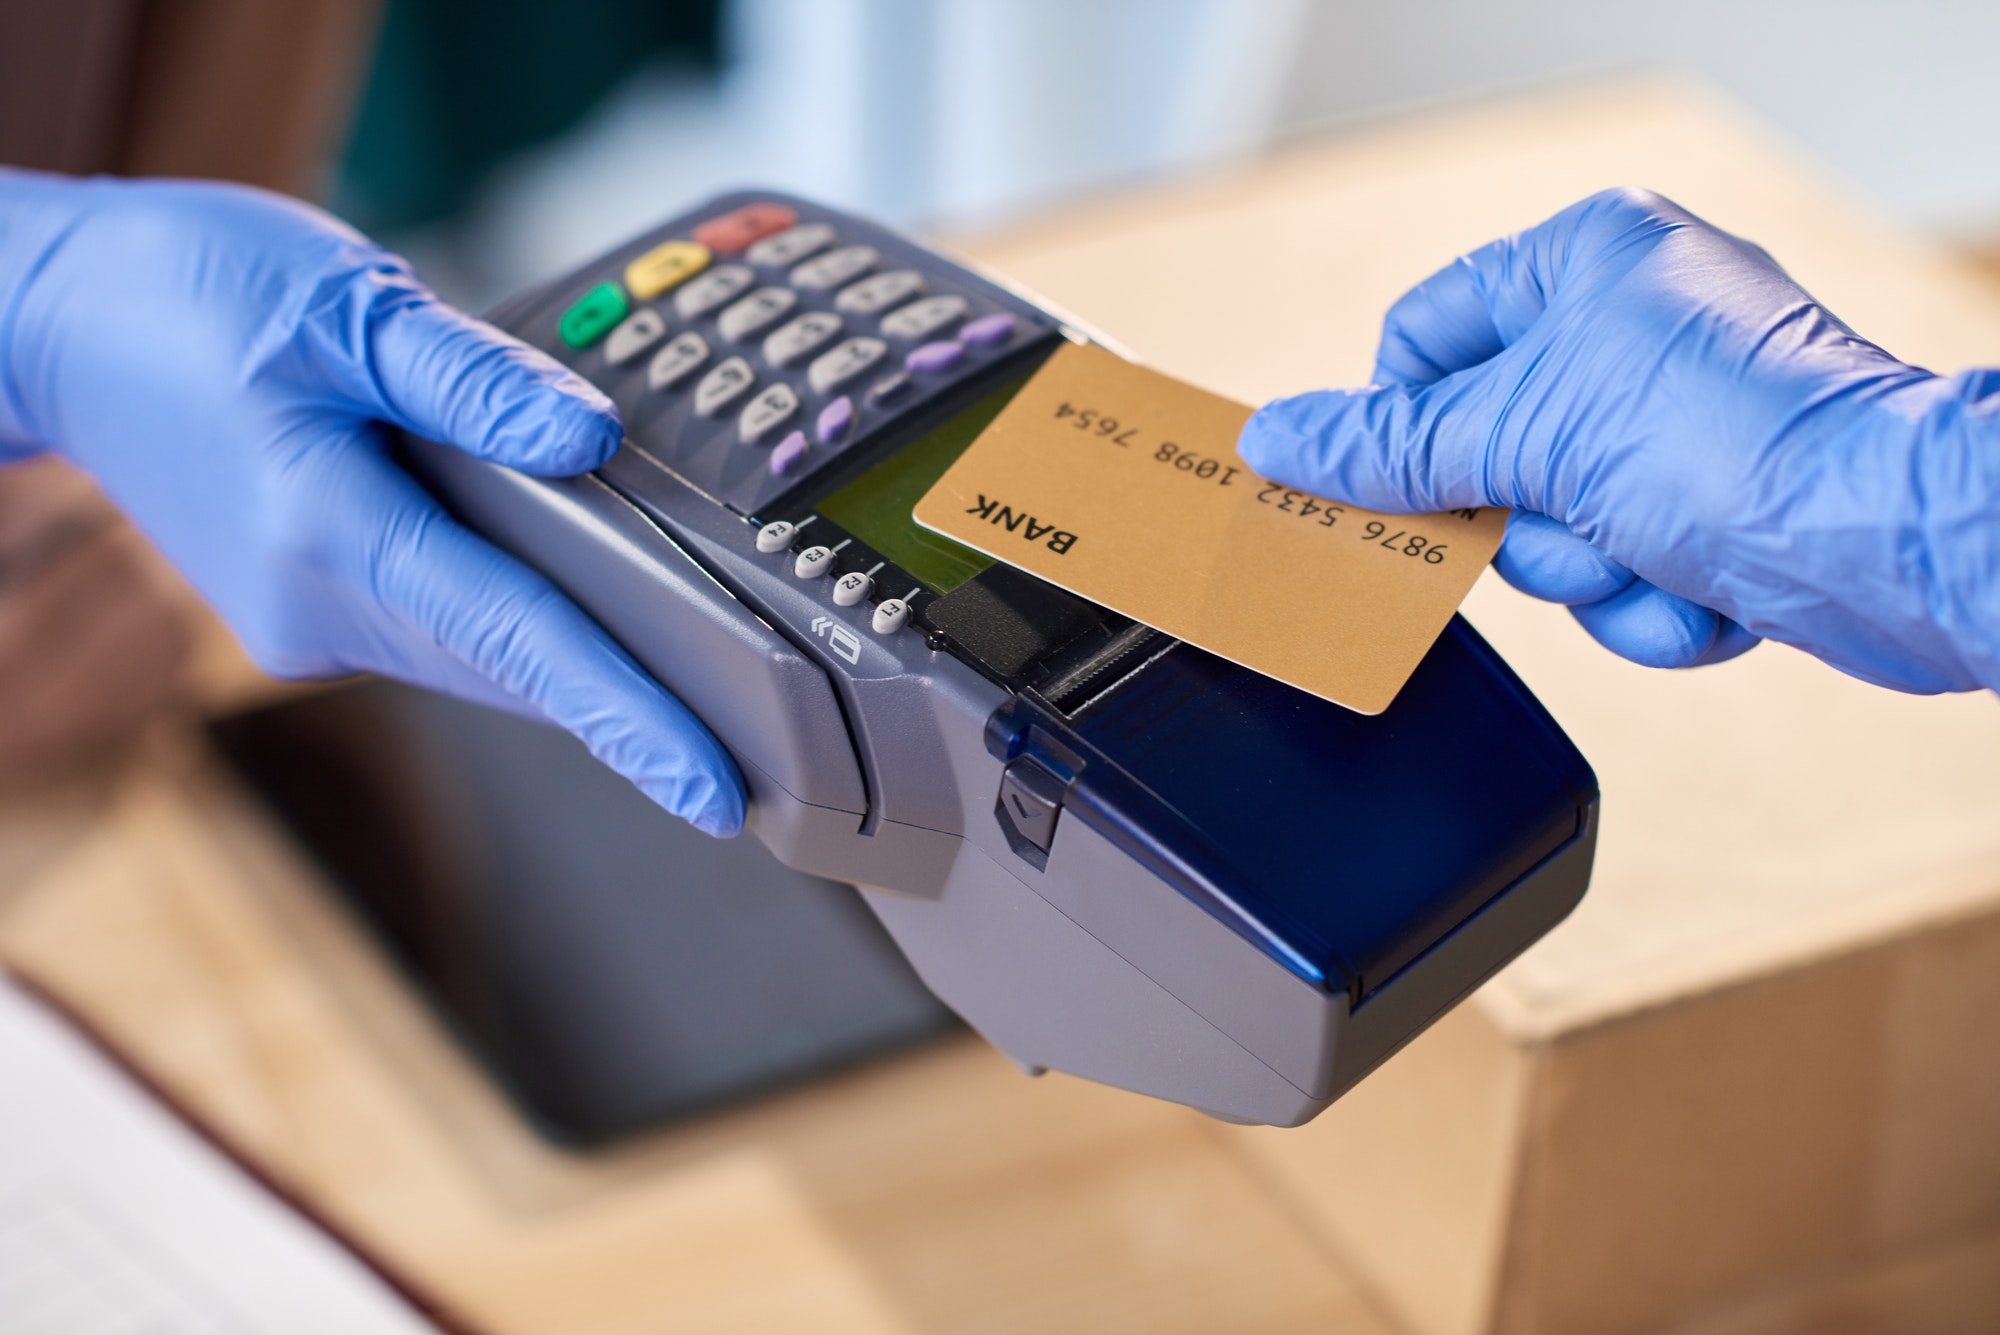 Contactless payment with credit card